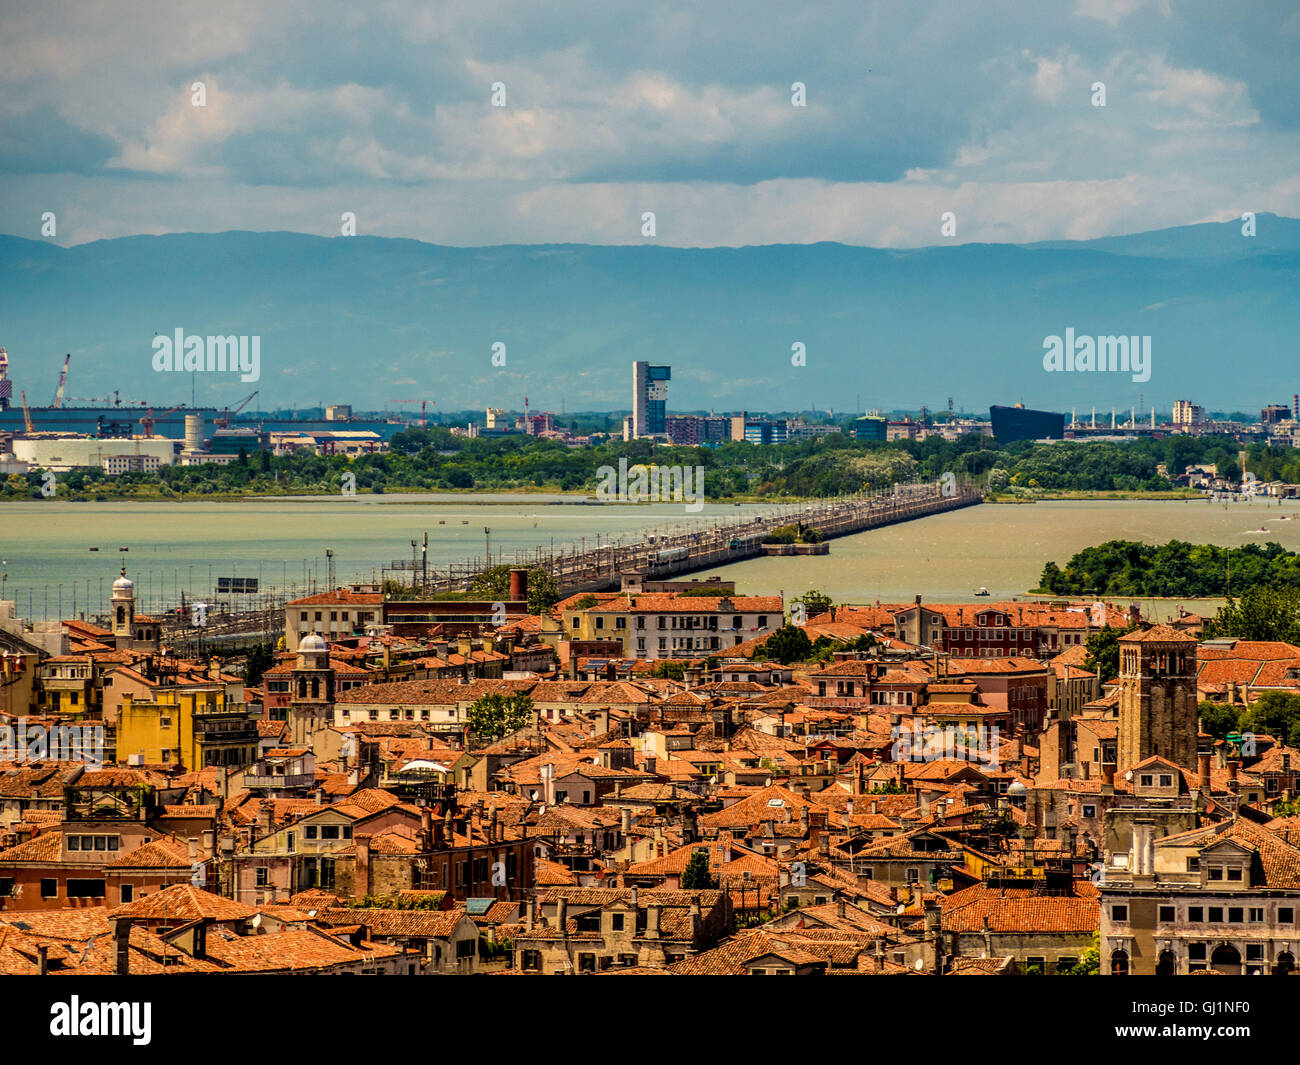 Aerial view of terracotta roofs, with the road and railway line from mainland Italy in the distance. Venice, Italy. Stock Photo